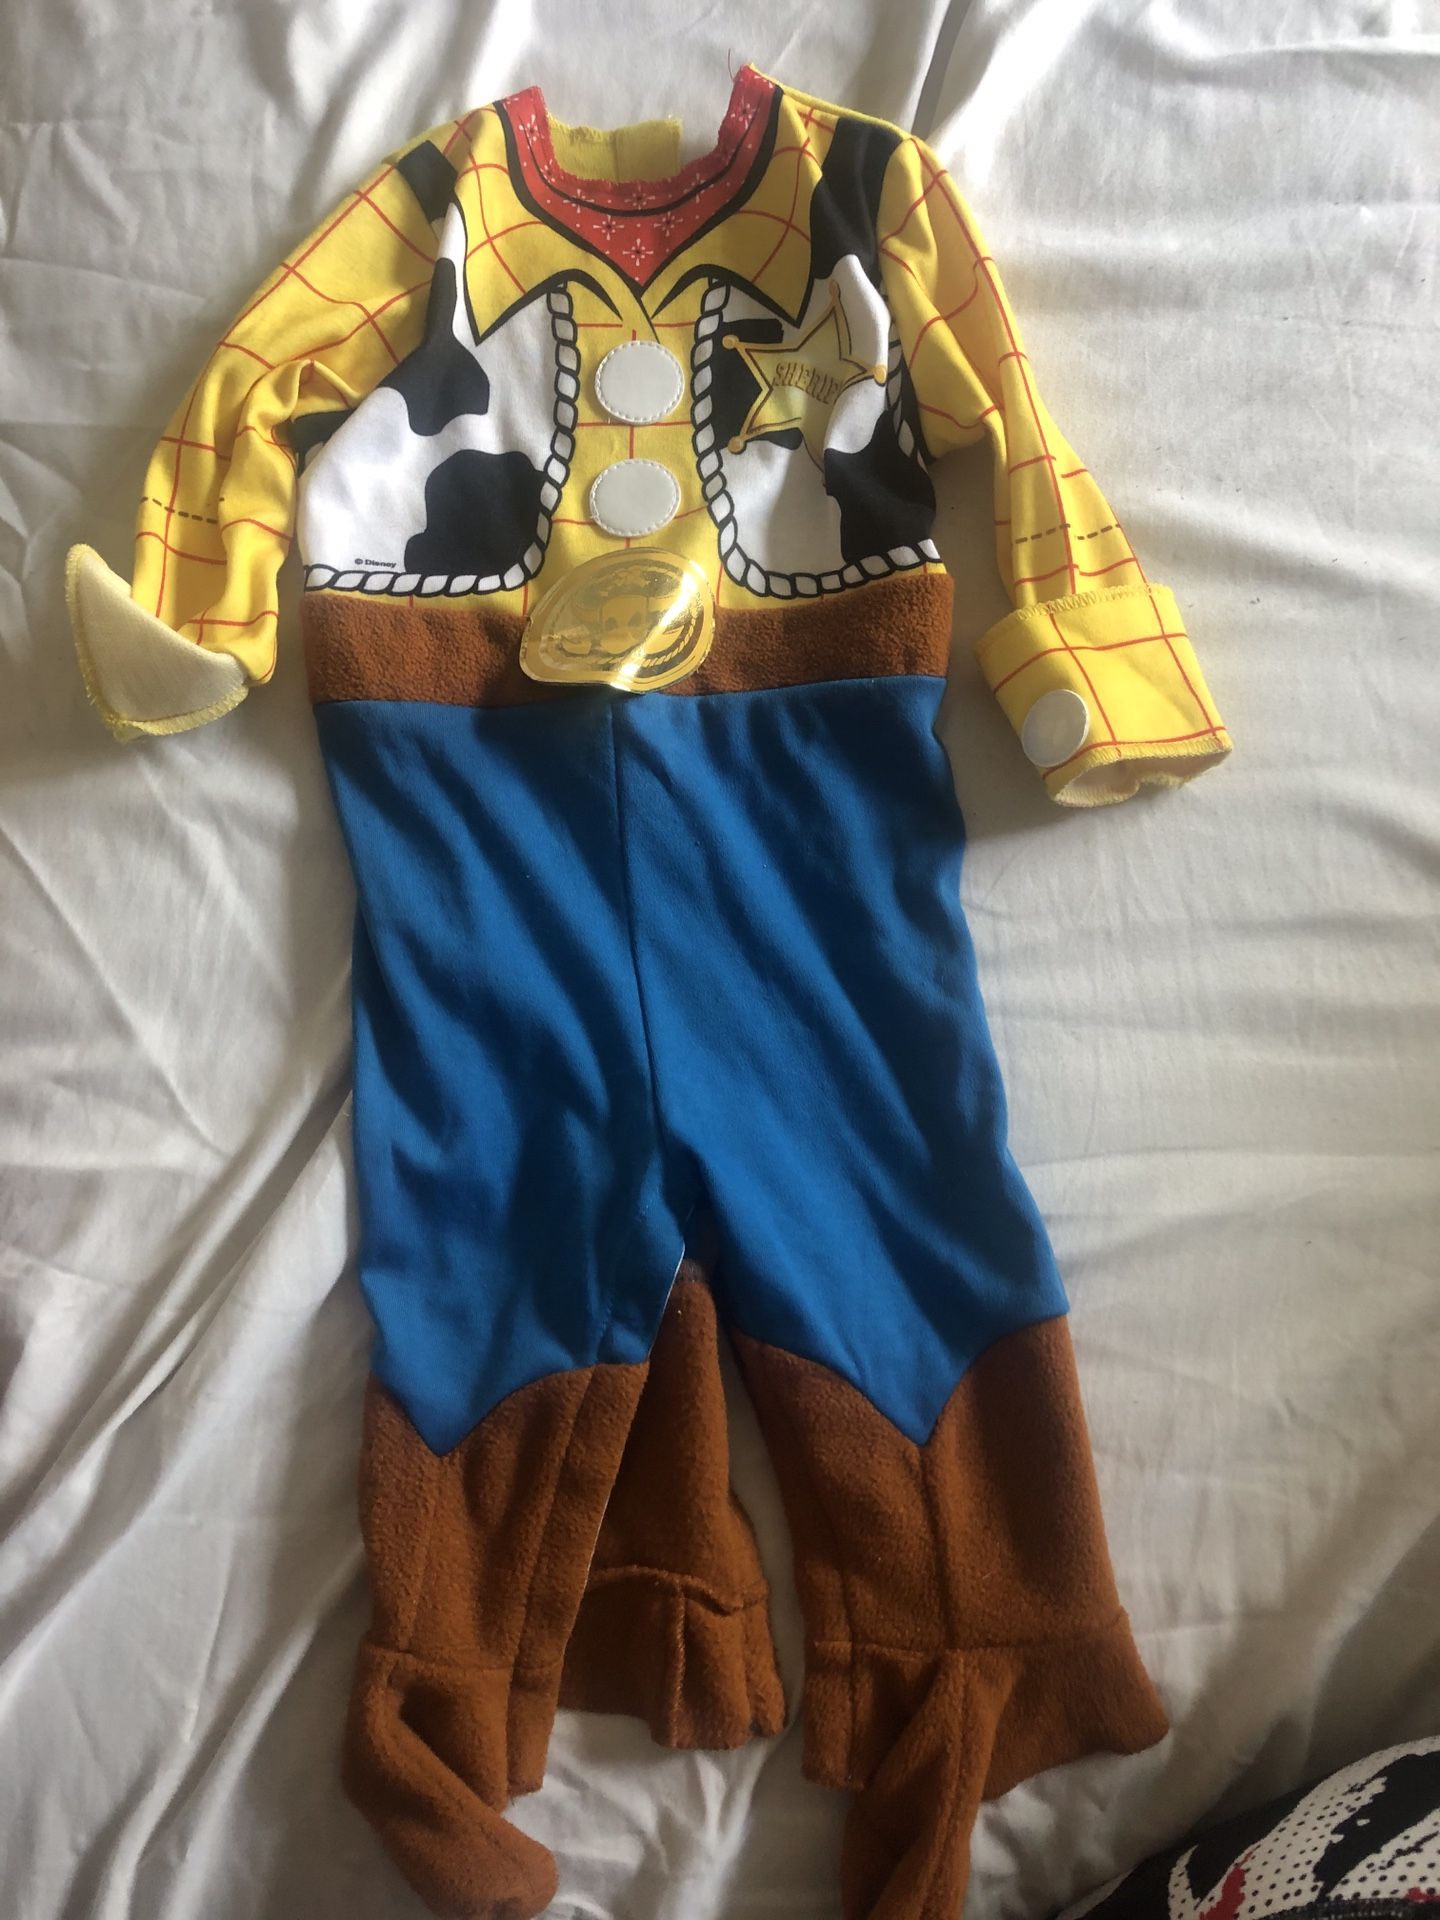 Woody costume 9-12 months